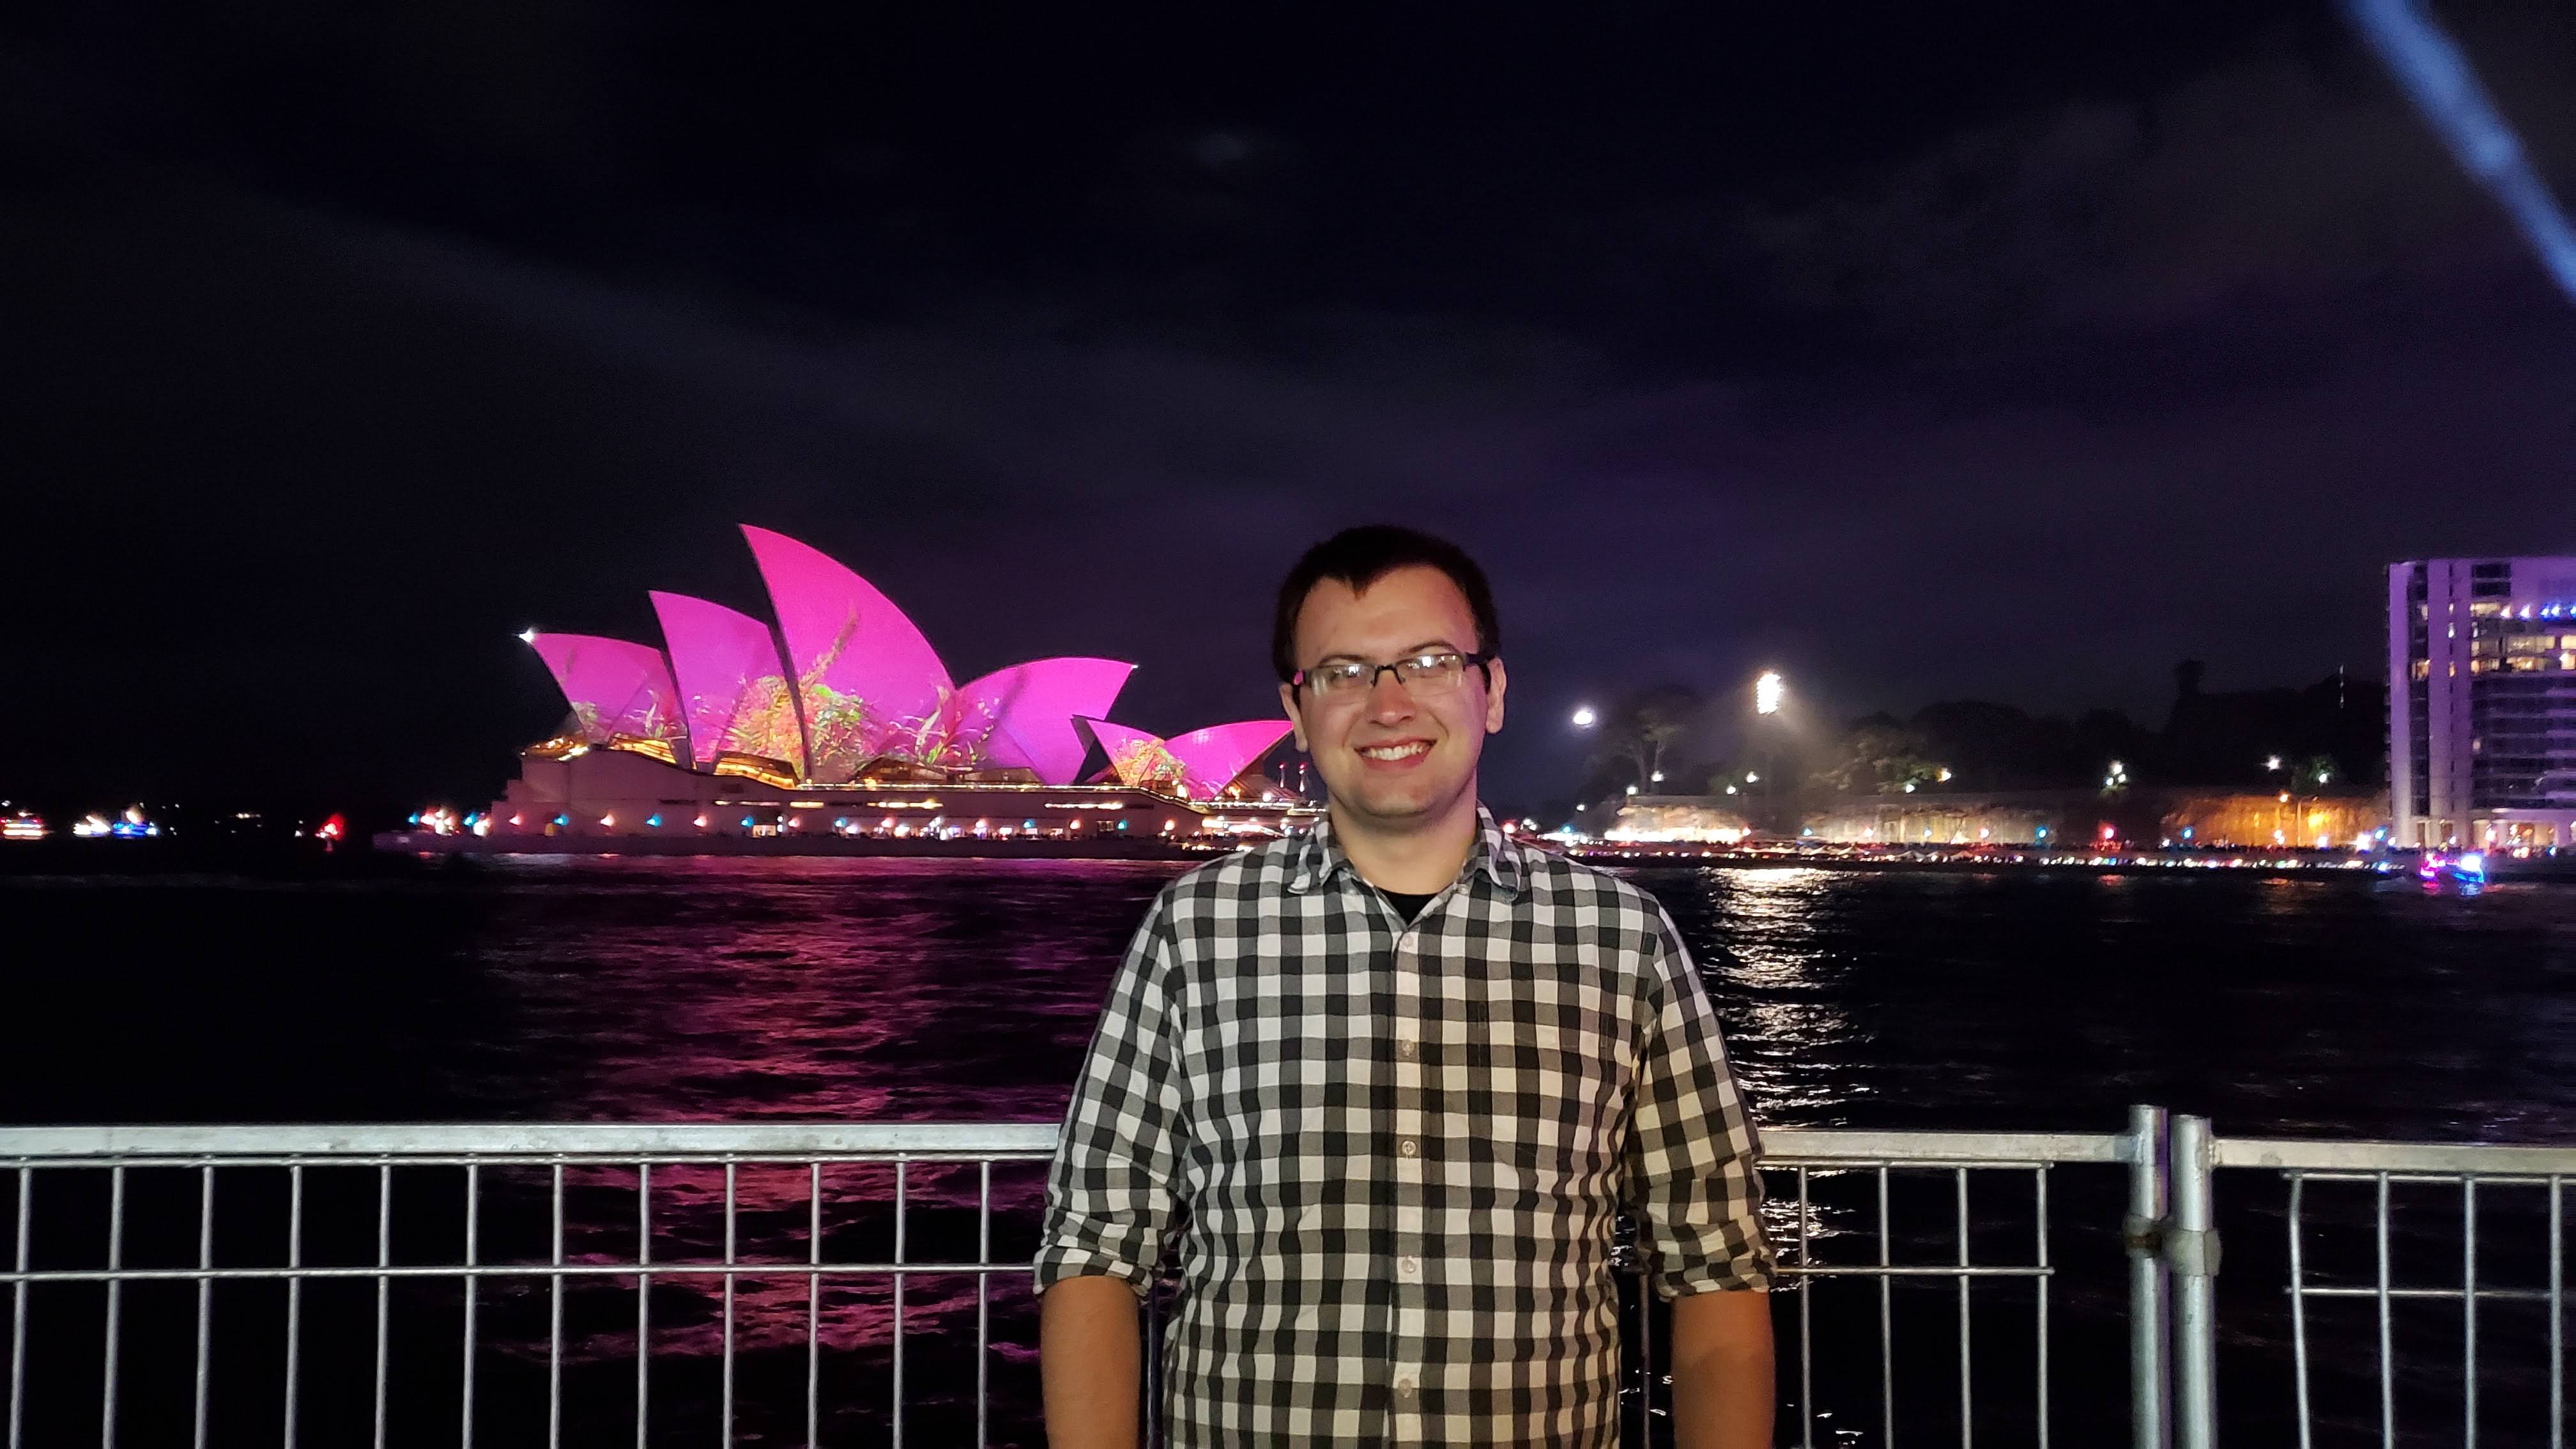 Kevin posing in front of Sydney Opera House illuminated in purple lights. 